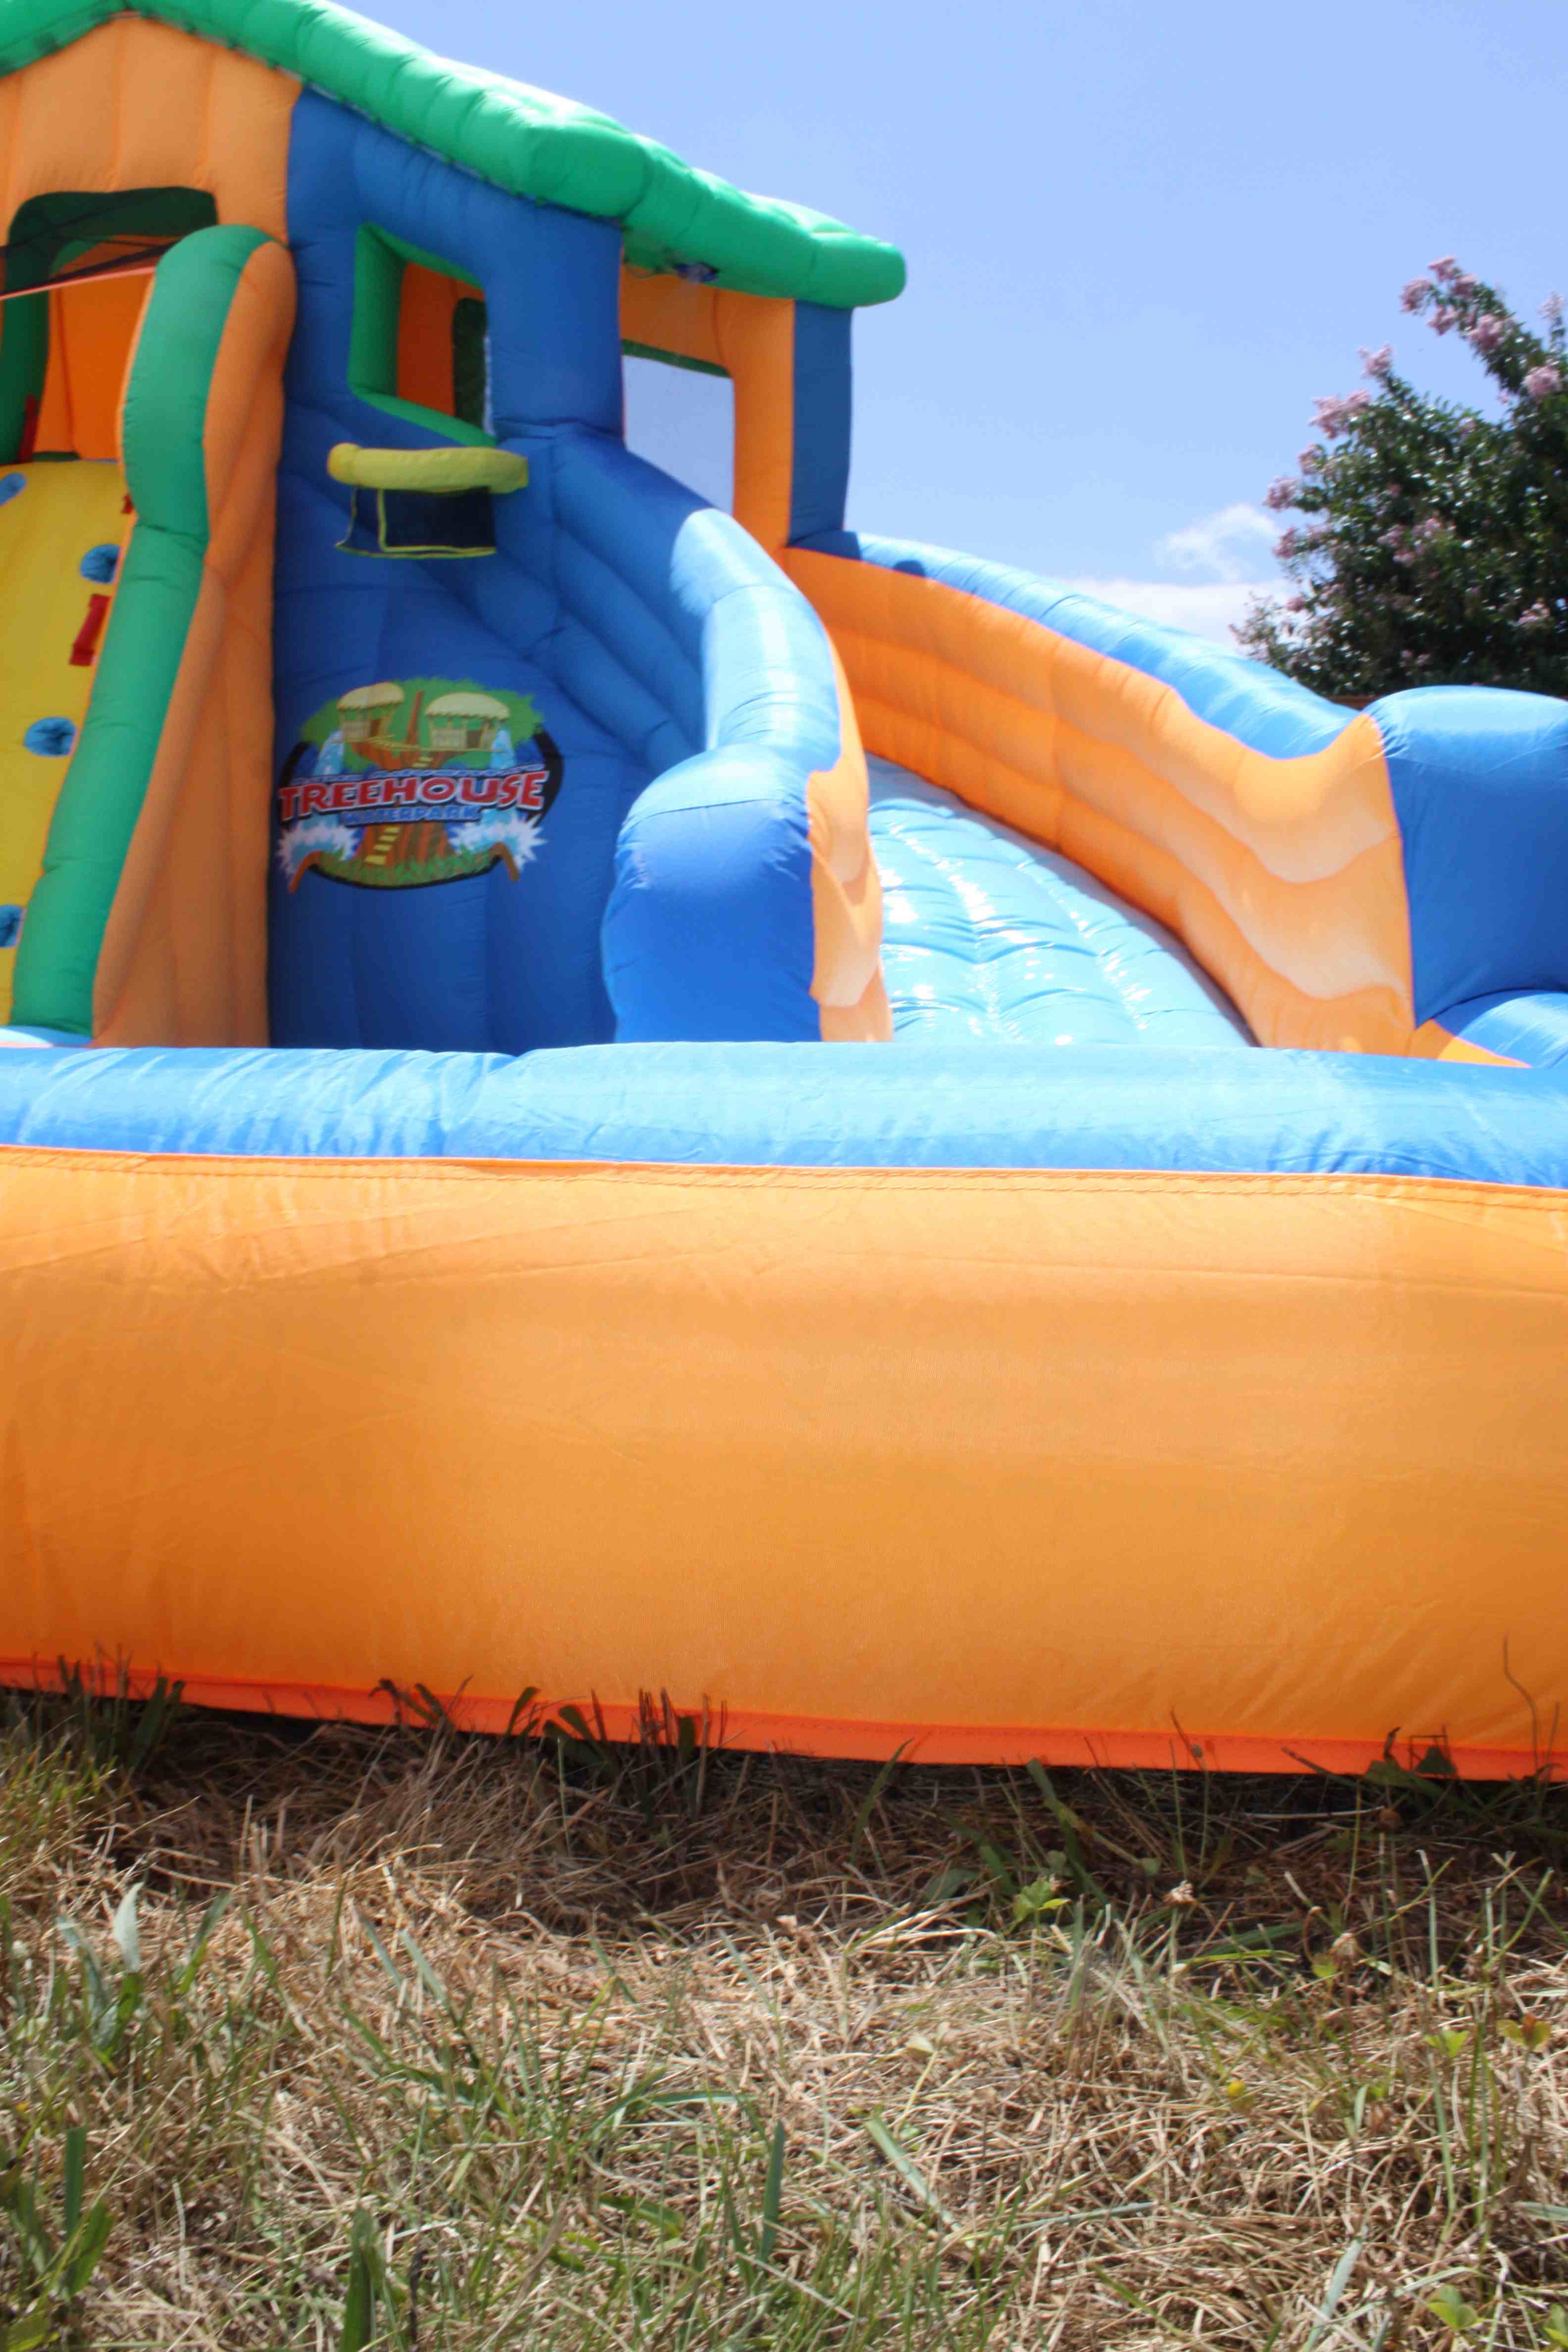 Inflatable bounce houses can be dangerous.